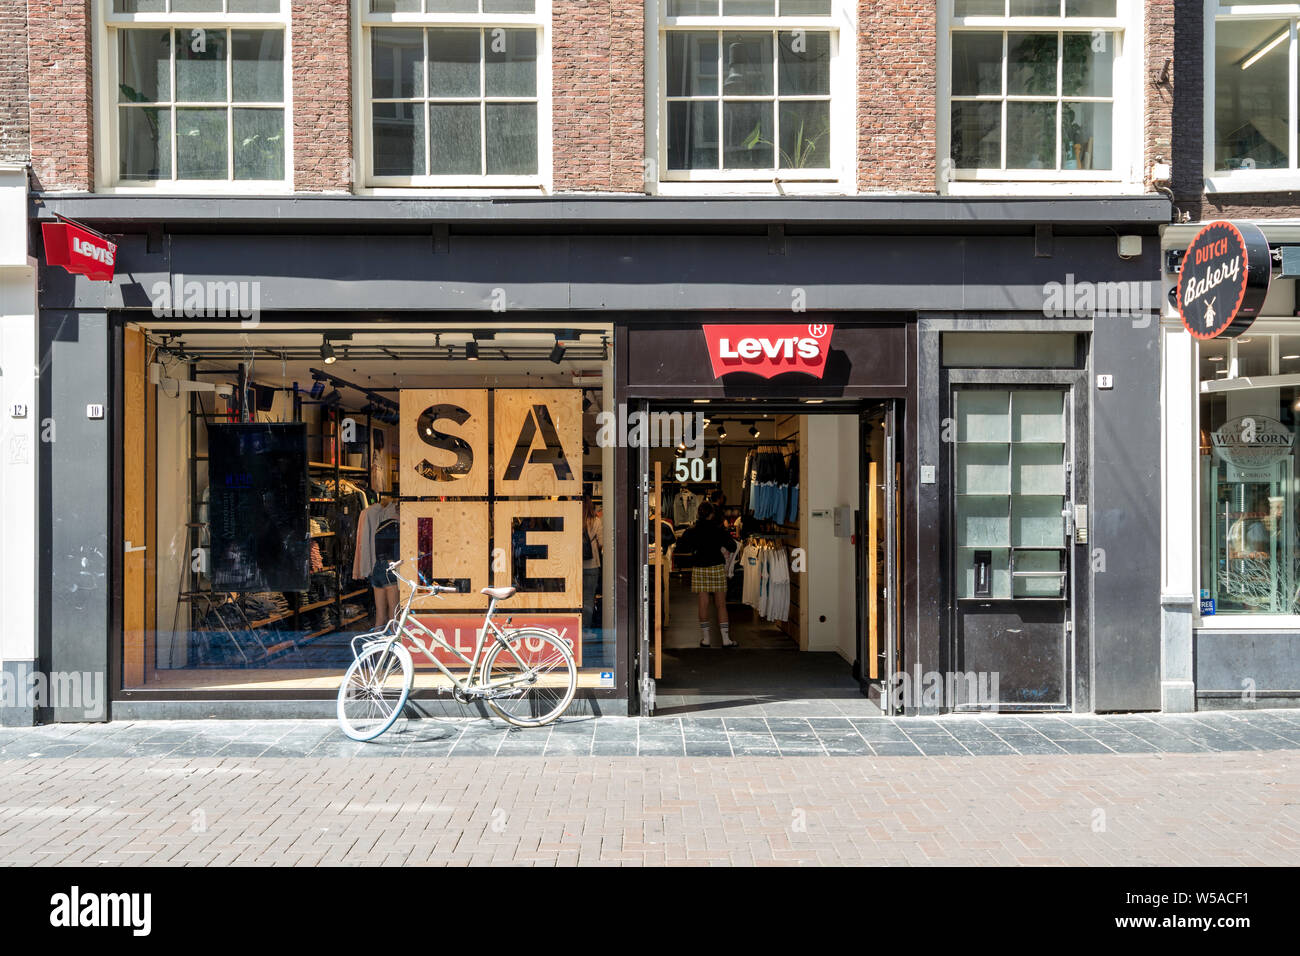 Orkaan teller toespraak Levi's store in Amsterdam, The Netherlands. Levi's is brand of denim jeans,  owned by Levi Strauss & Co., an American clothing company Stock Photo -  Alamy